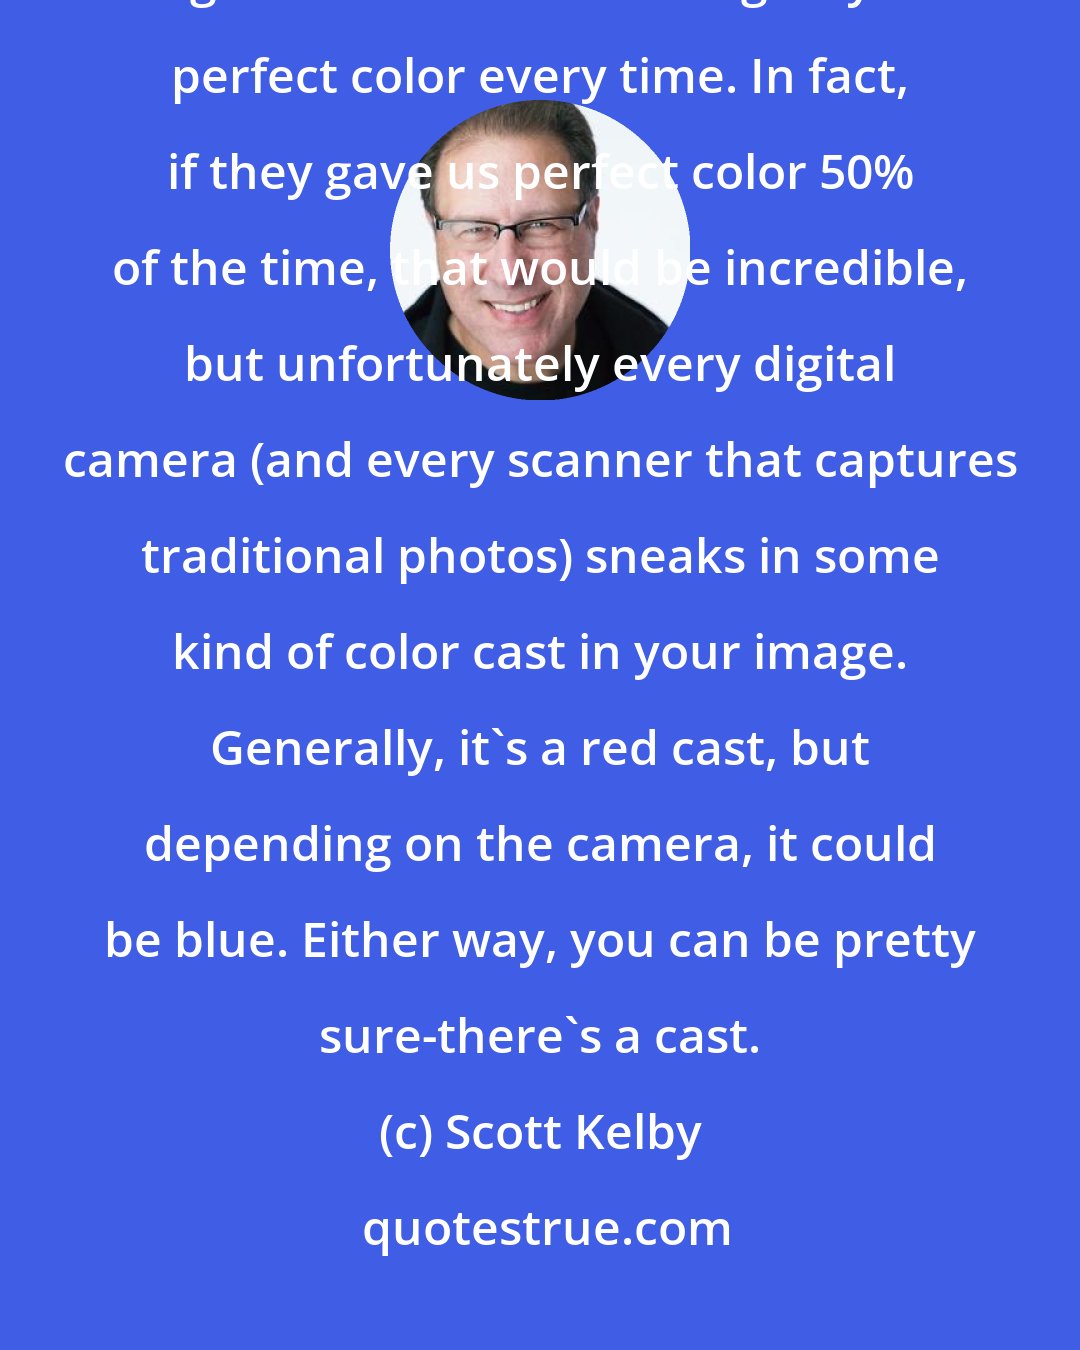 Scott Kelby: As far as digital technology has come, there's still one thing that digital cameras won't do: give you perfect color every time. In fact, if they gave us perfect color 50% of the time, that would be incredible, but unfortunately every digital camera (and every scanner that captures traditional photos) sneaks in some kind of color cast in your image. Generally, it's a red cast, but depending on the camera, it could be blue. Either way, you can be pretty sure-there's a cast.